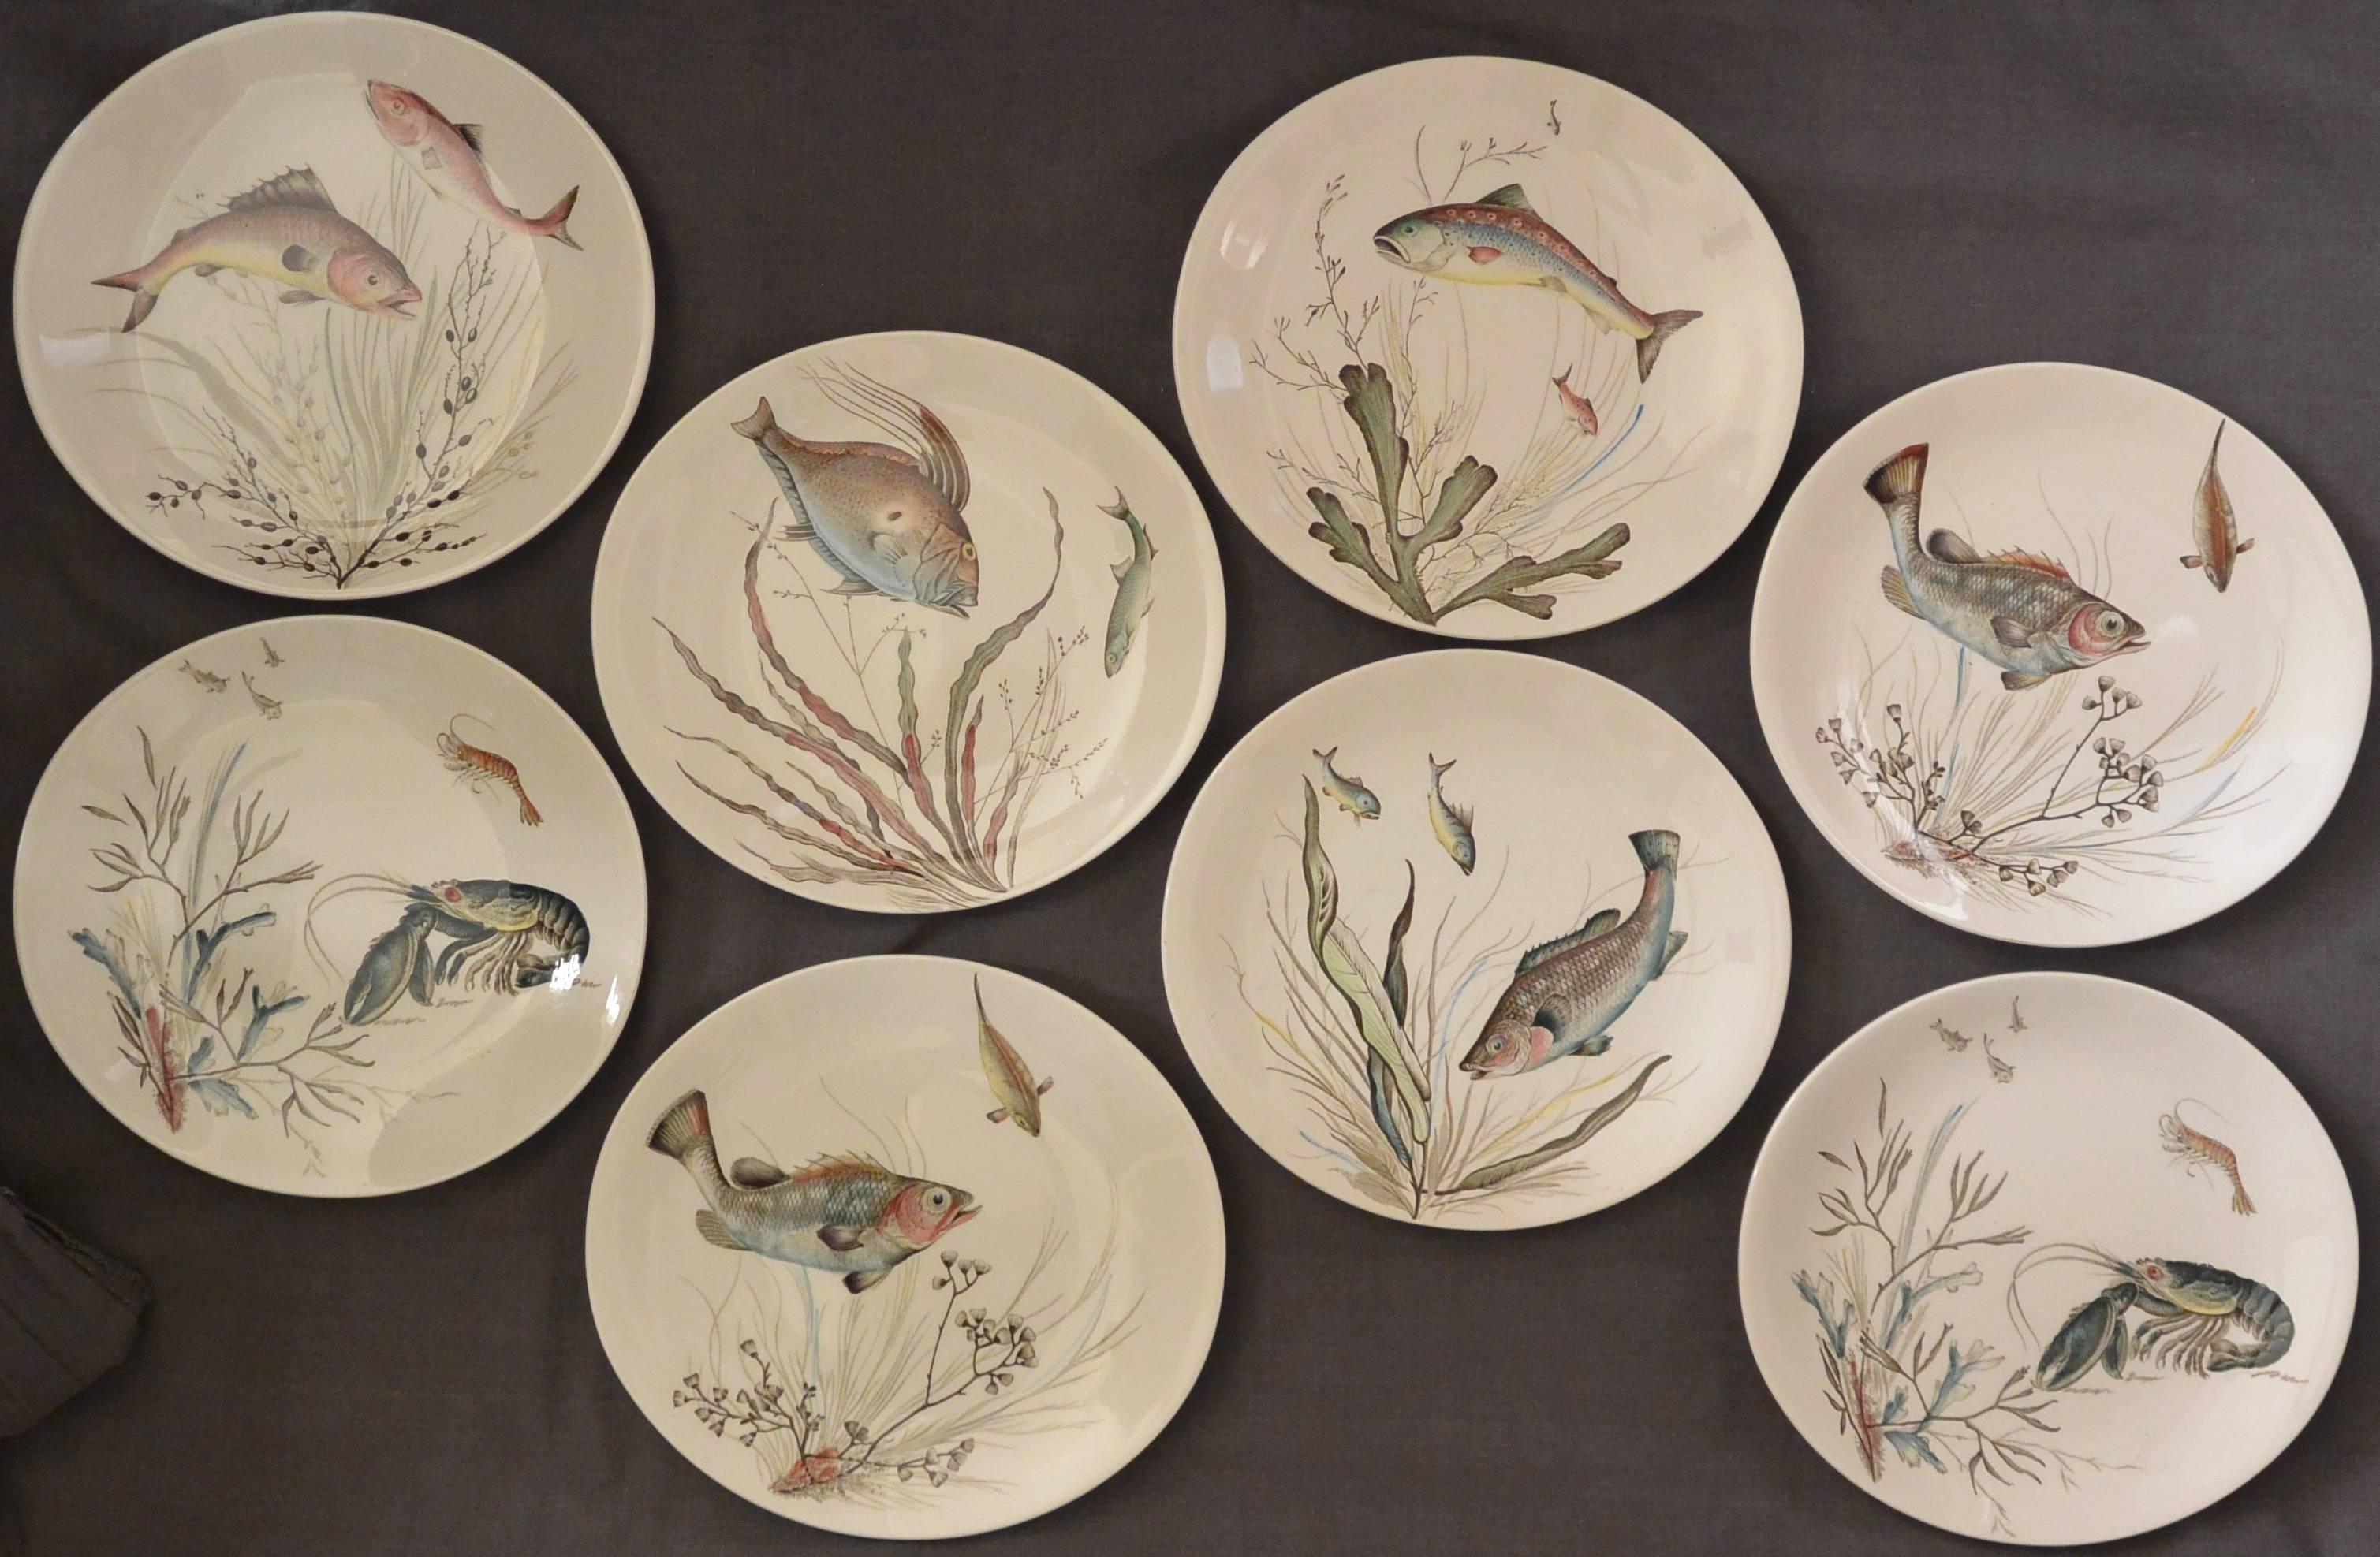 Set of eight oval fish plates. Stamp Johnson Brothers, England, 20th century
Dimensions: 10.5